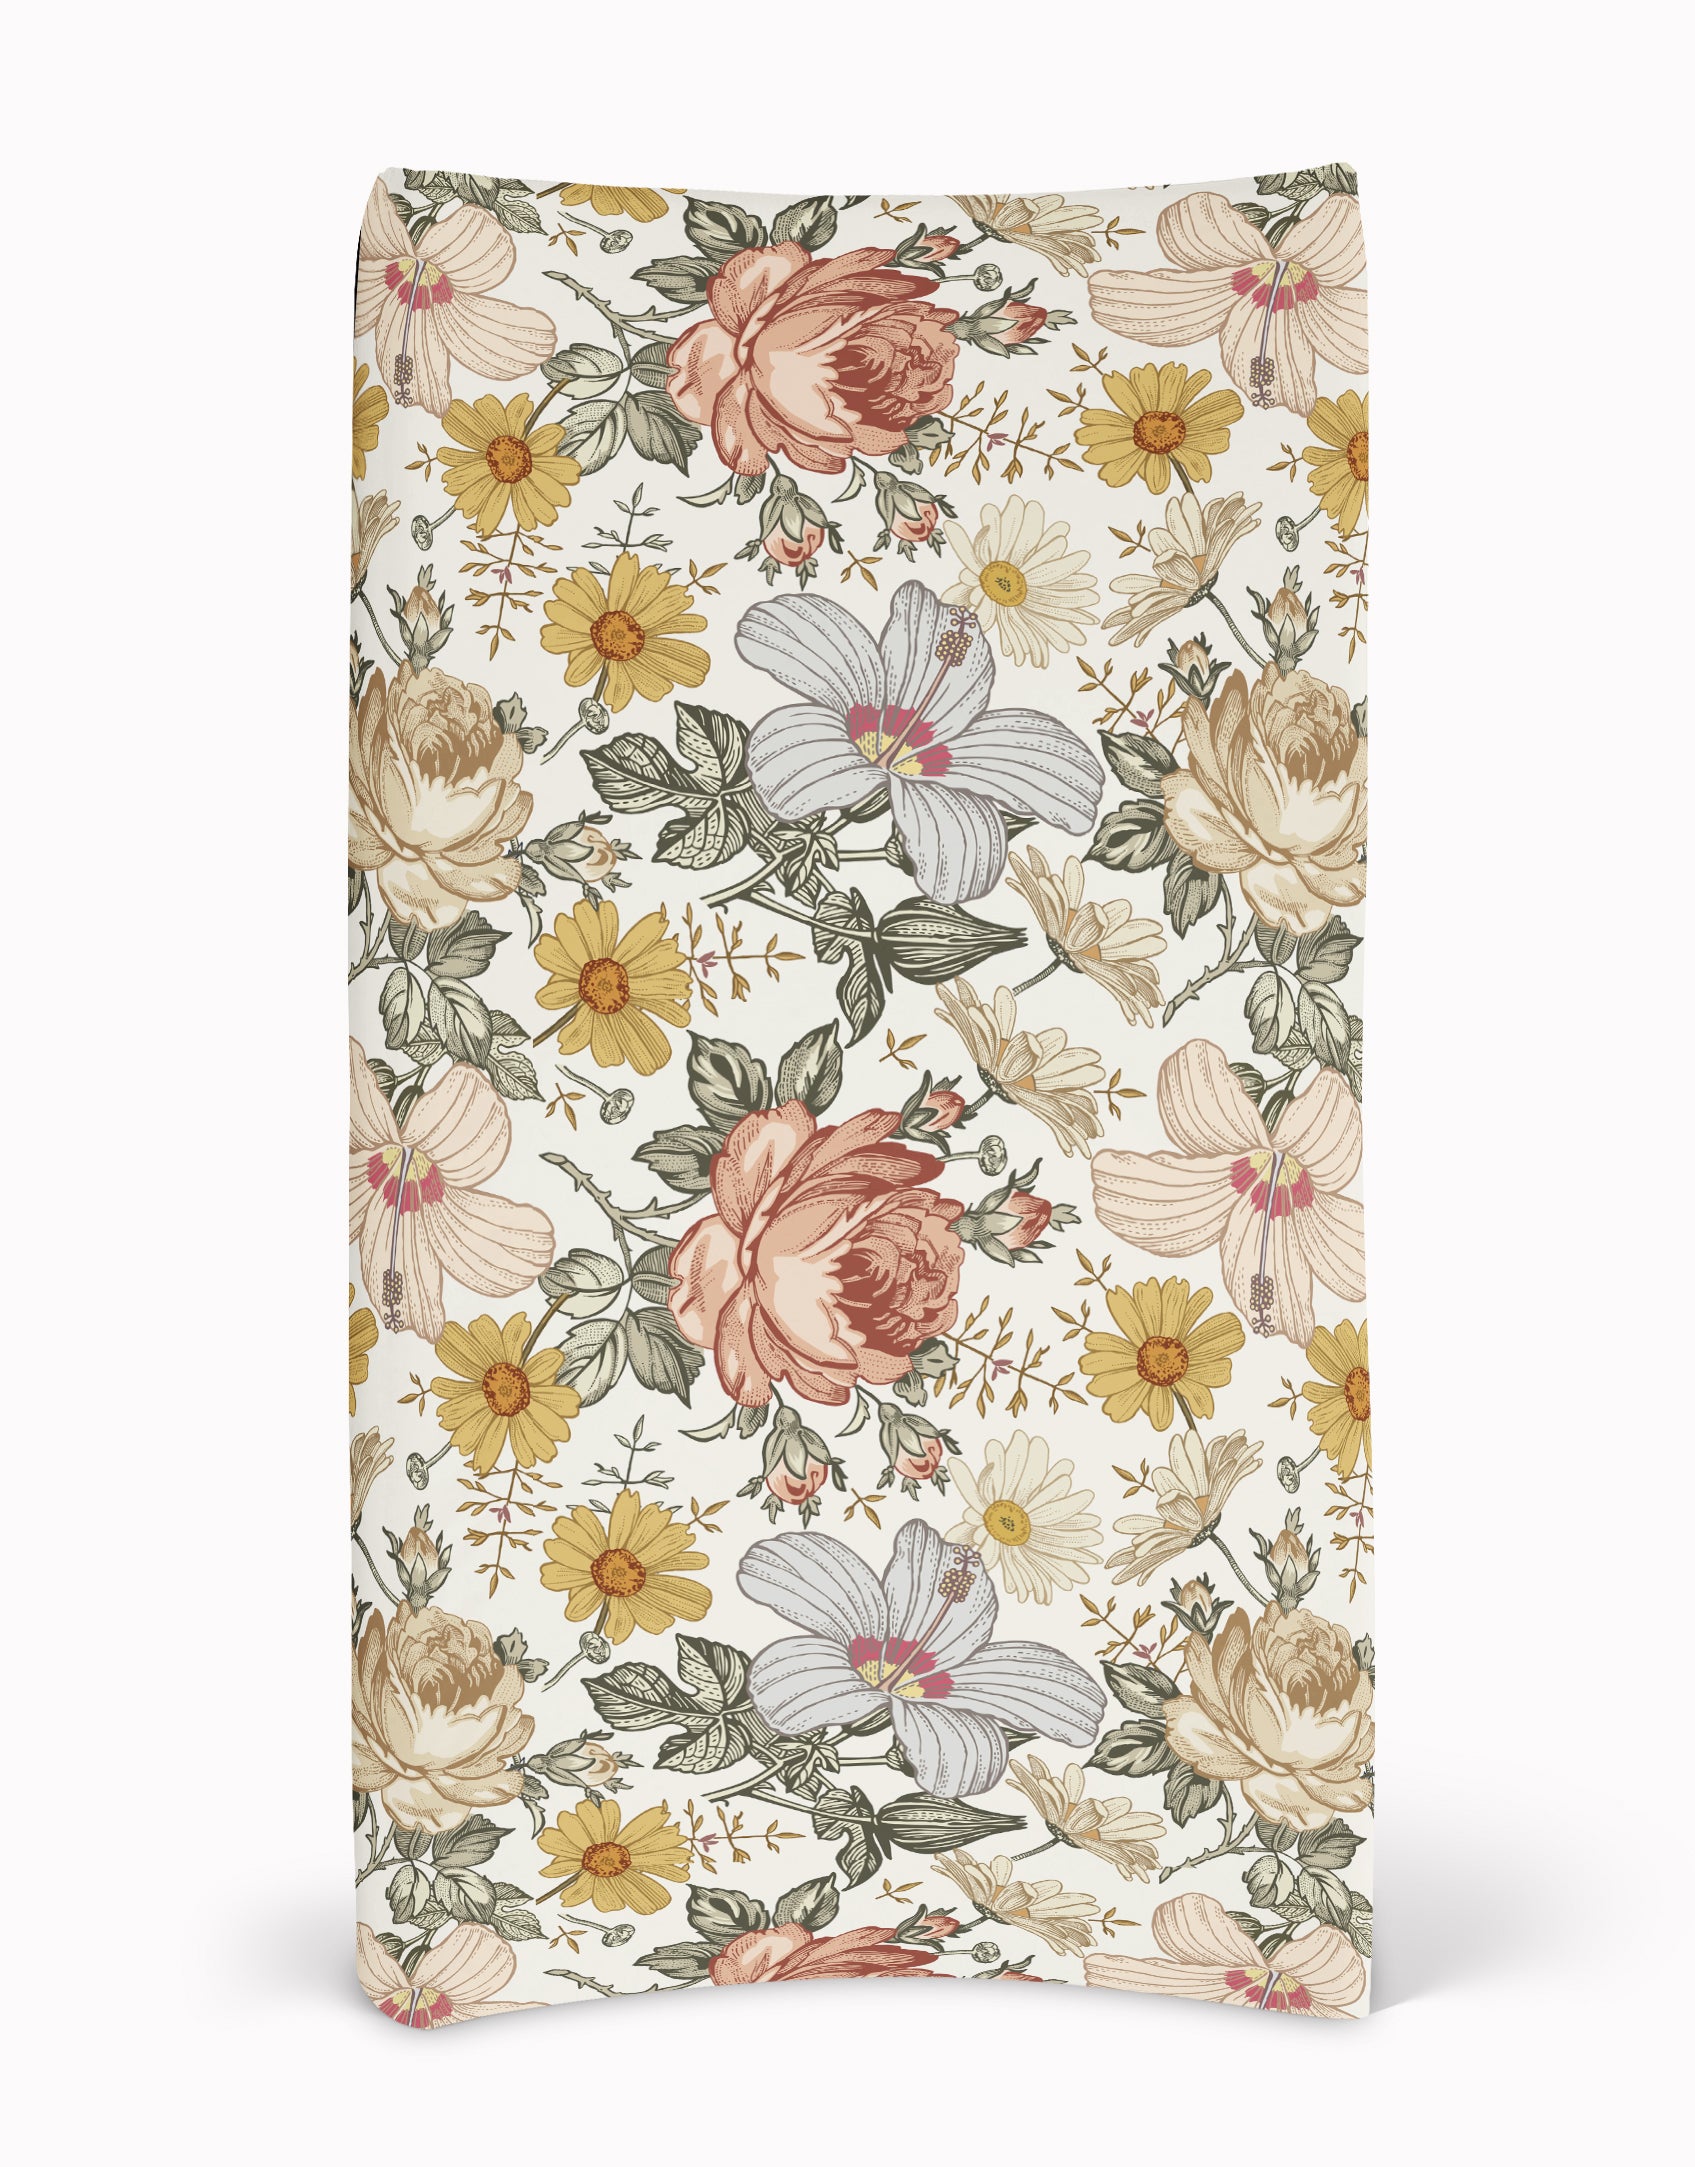 Vintage Wildflower Floral Crib Sheet and Change Pad Cover